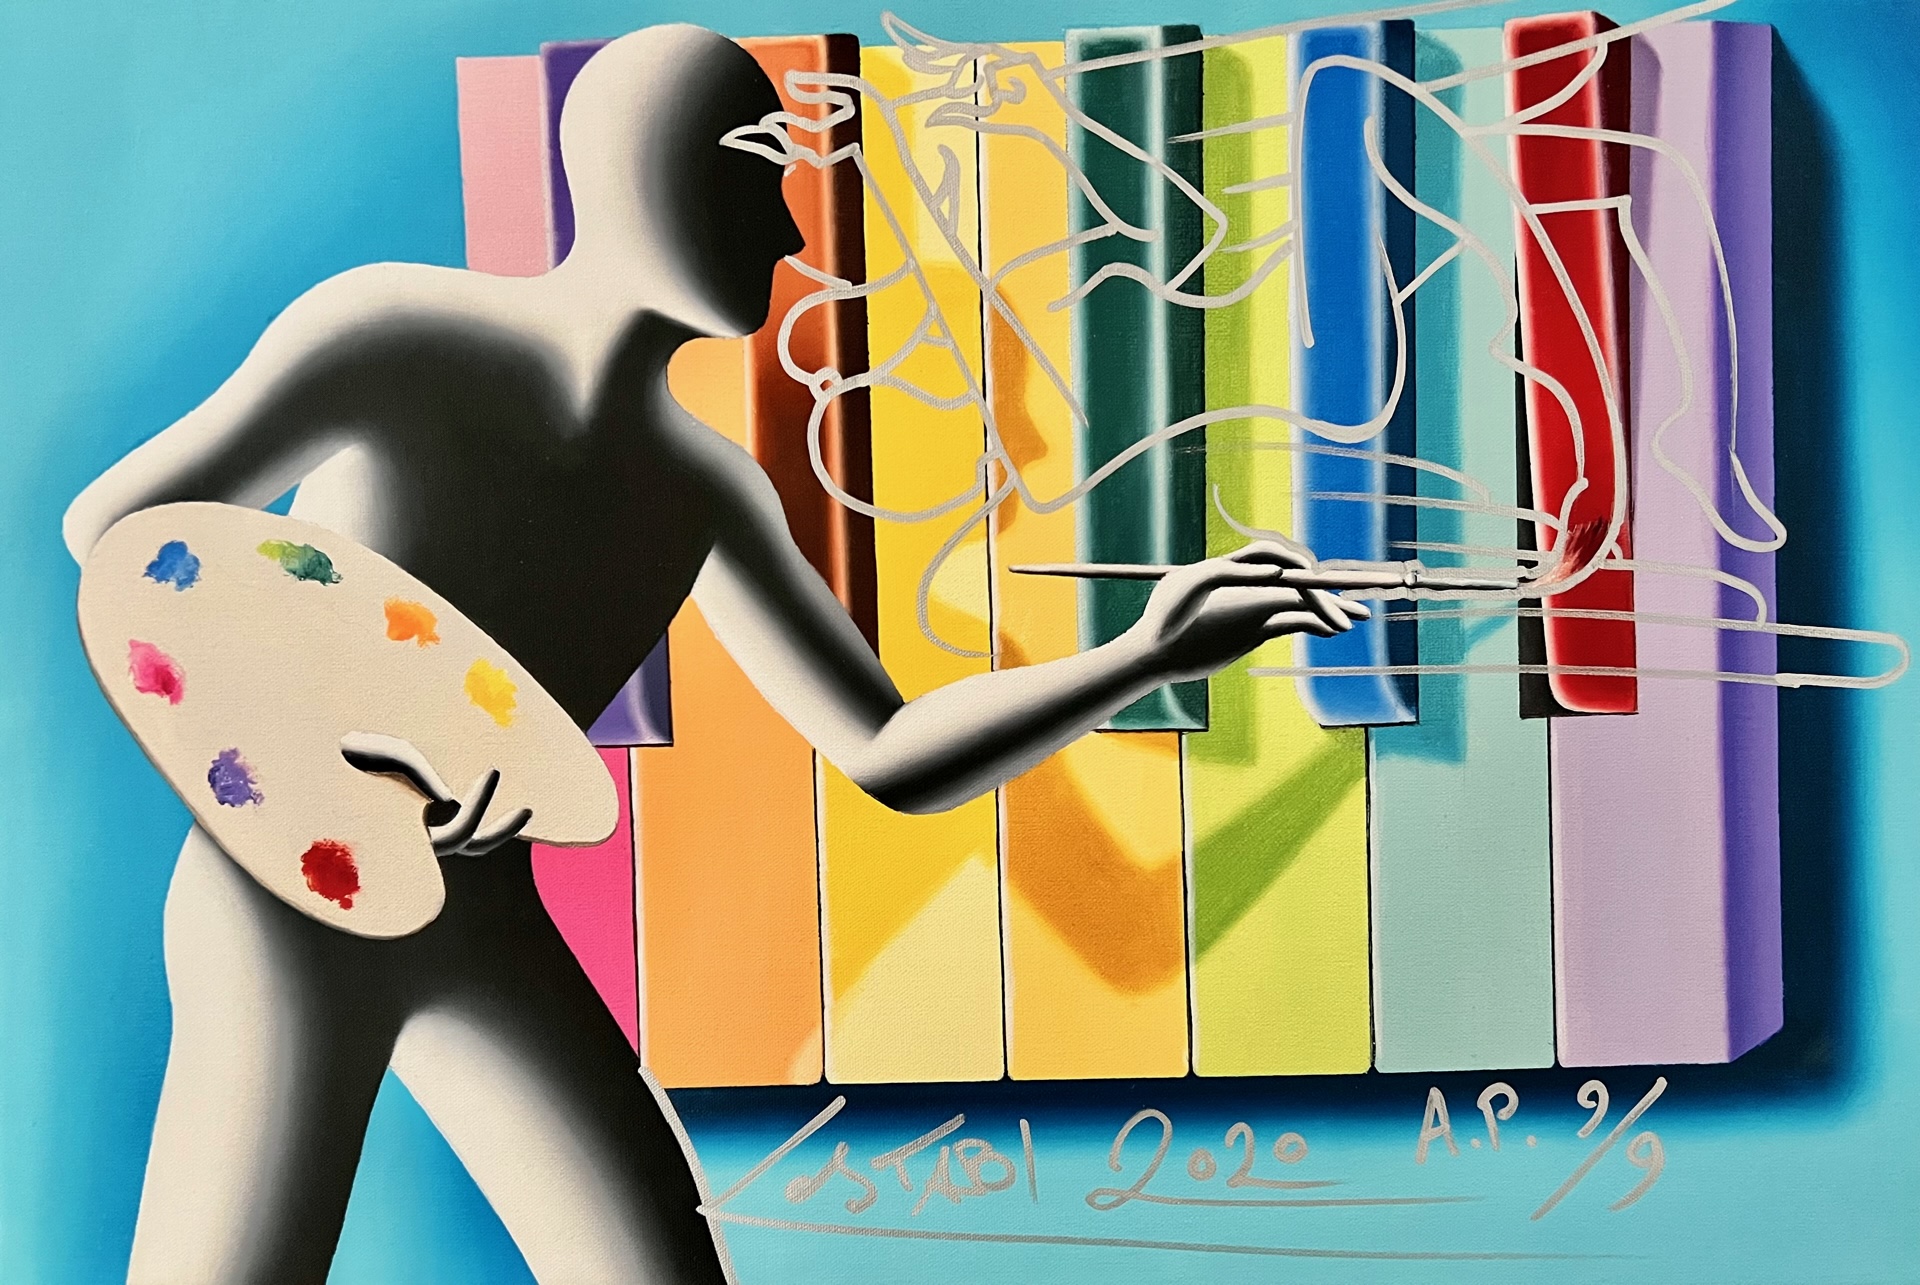 MARK KOSTABI - Scarlet A Sharp - Limited Edition Giclee on Canvas w/ Oil Pen